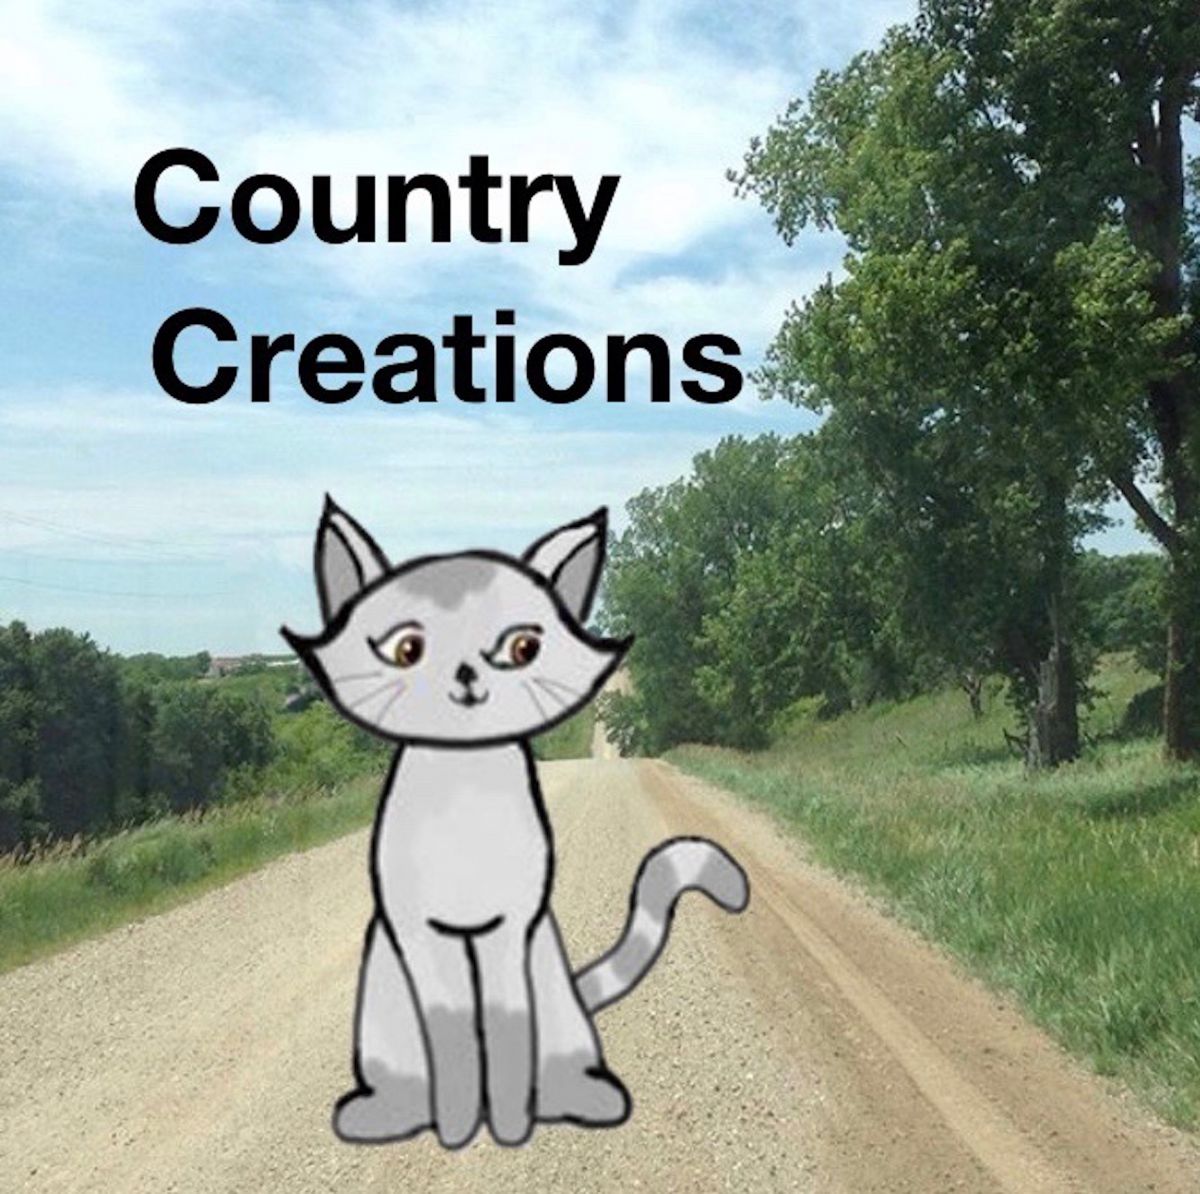 countrycreations